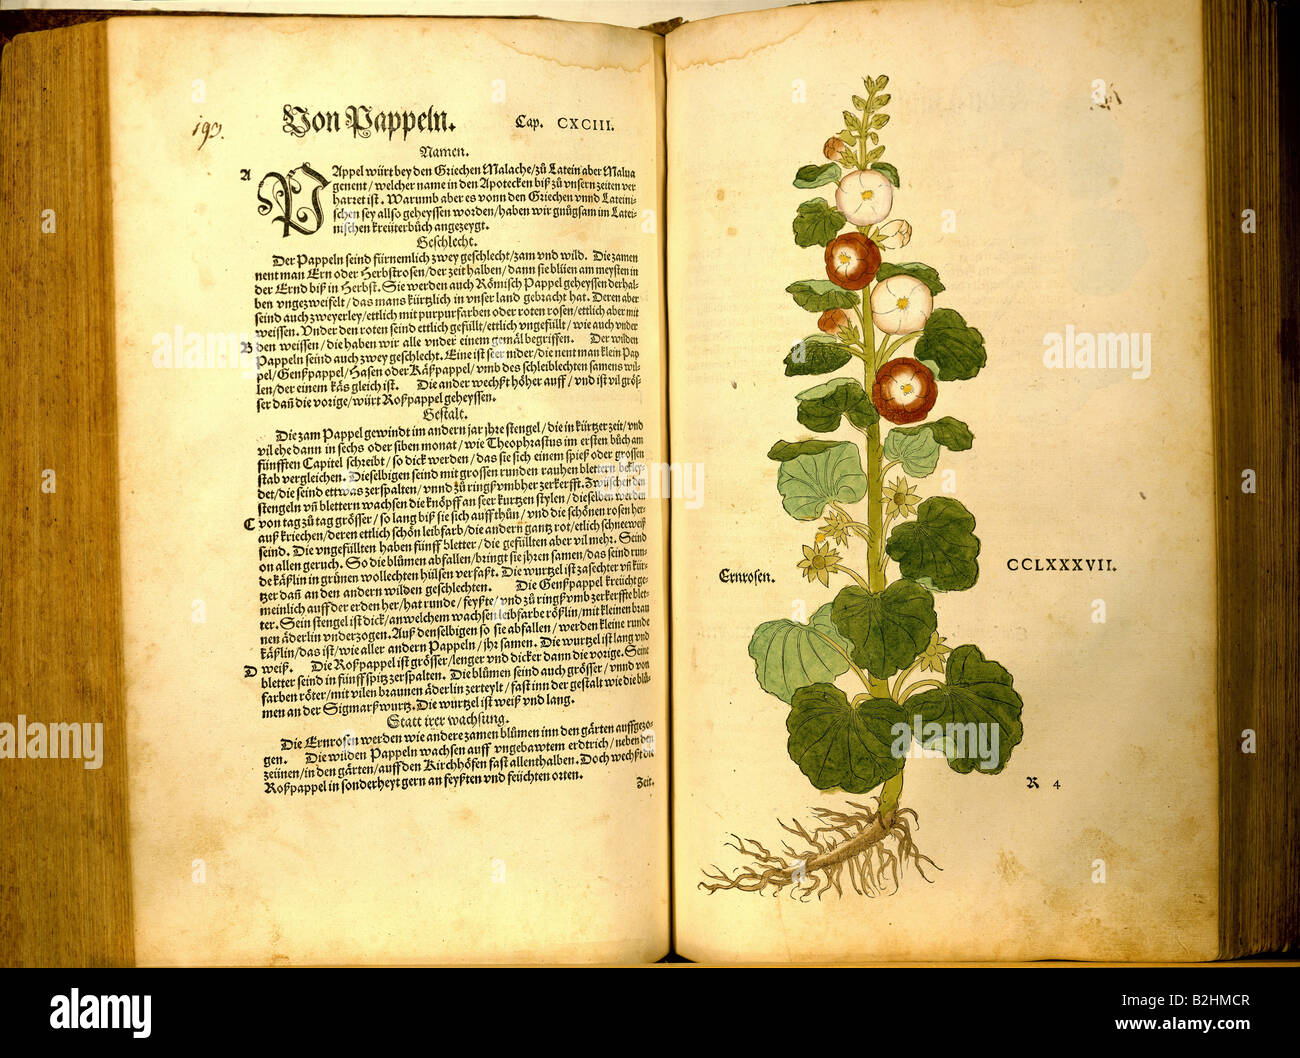 botany, herbs, Populus and hollyhocks (Alcea), from 'Neues Kraeuterbuch' (New herbal book), by Leonhart Fuchs, woodcut by Heinrich Fuellmaurer, coloured, drawn by Albrecht Mayer, printed at M. Isingrin, Basel, Switzerland, 1544, double page 198 / 199, 38 x 22 cm, private collection, Stock Photo